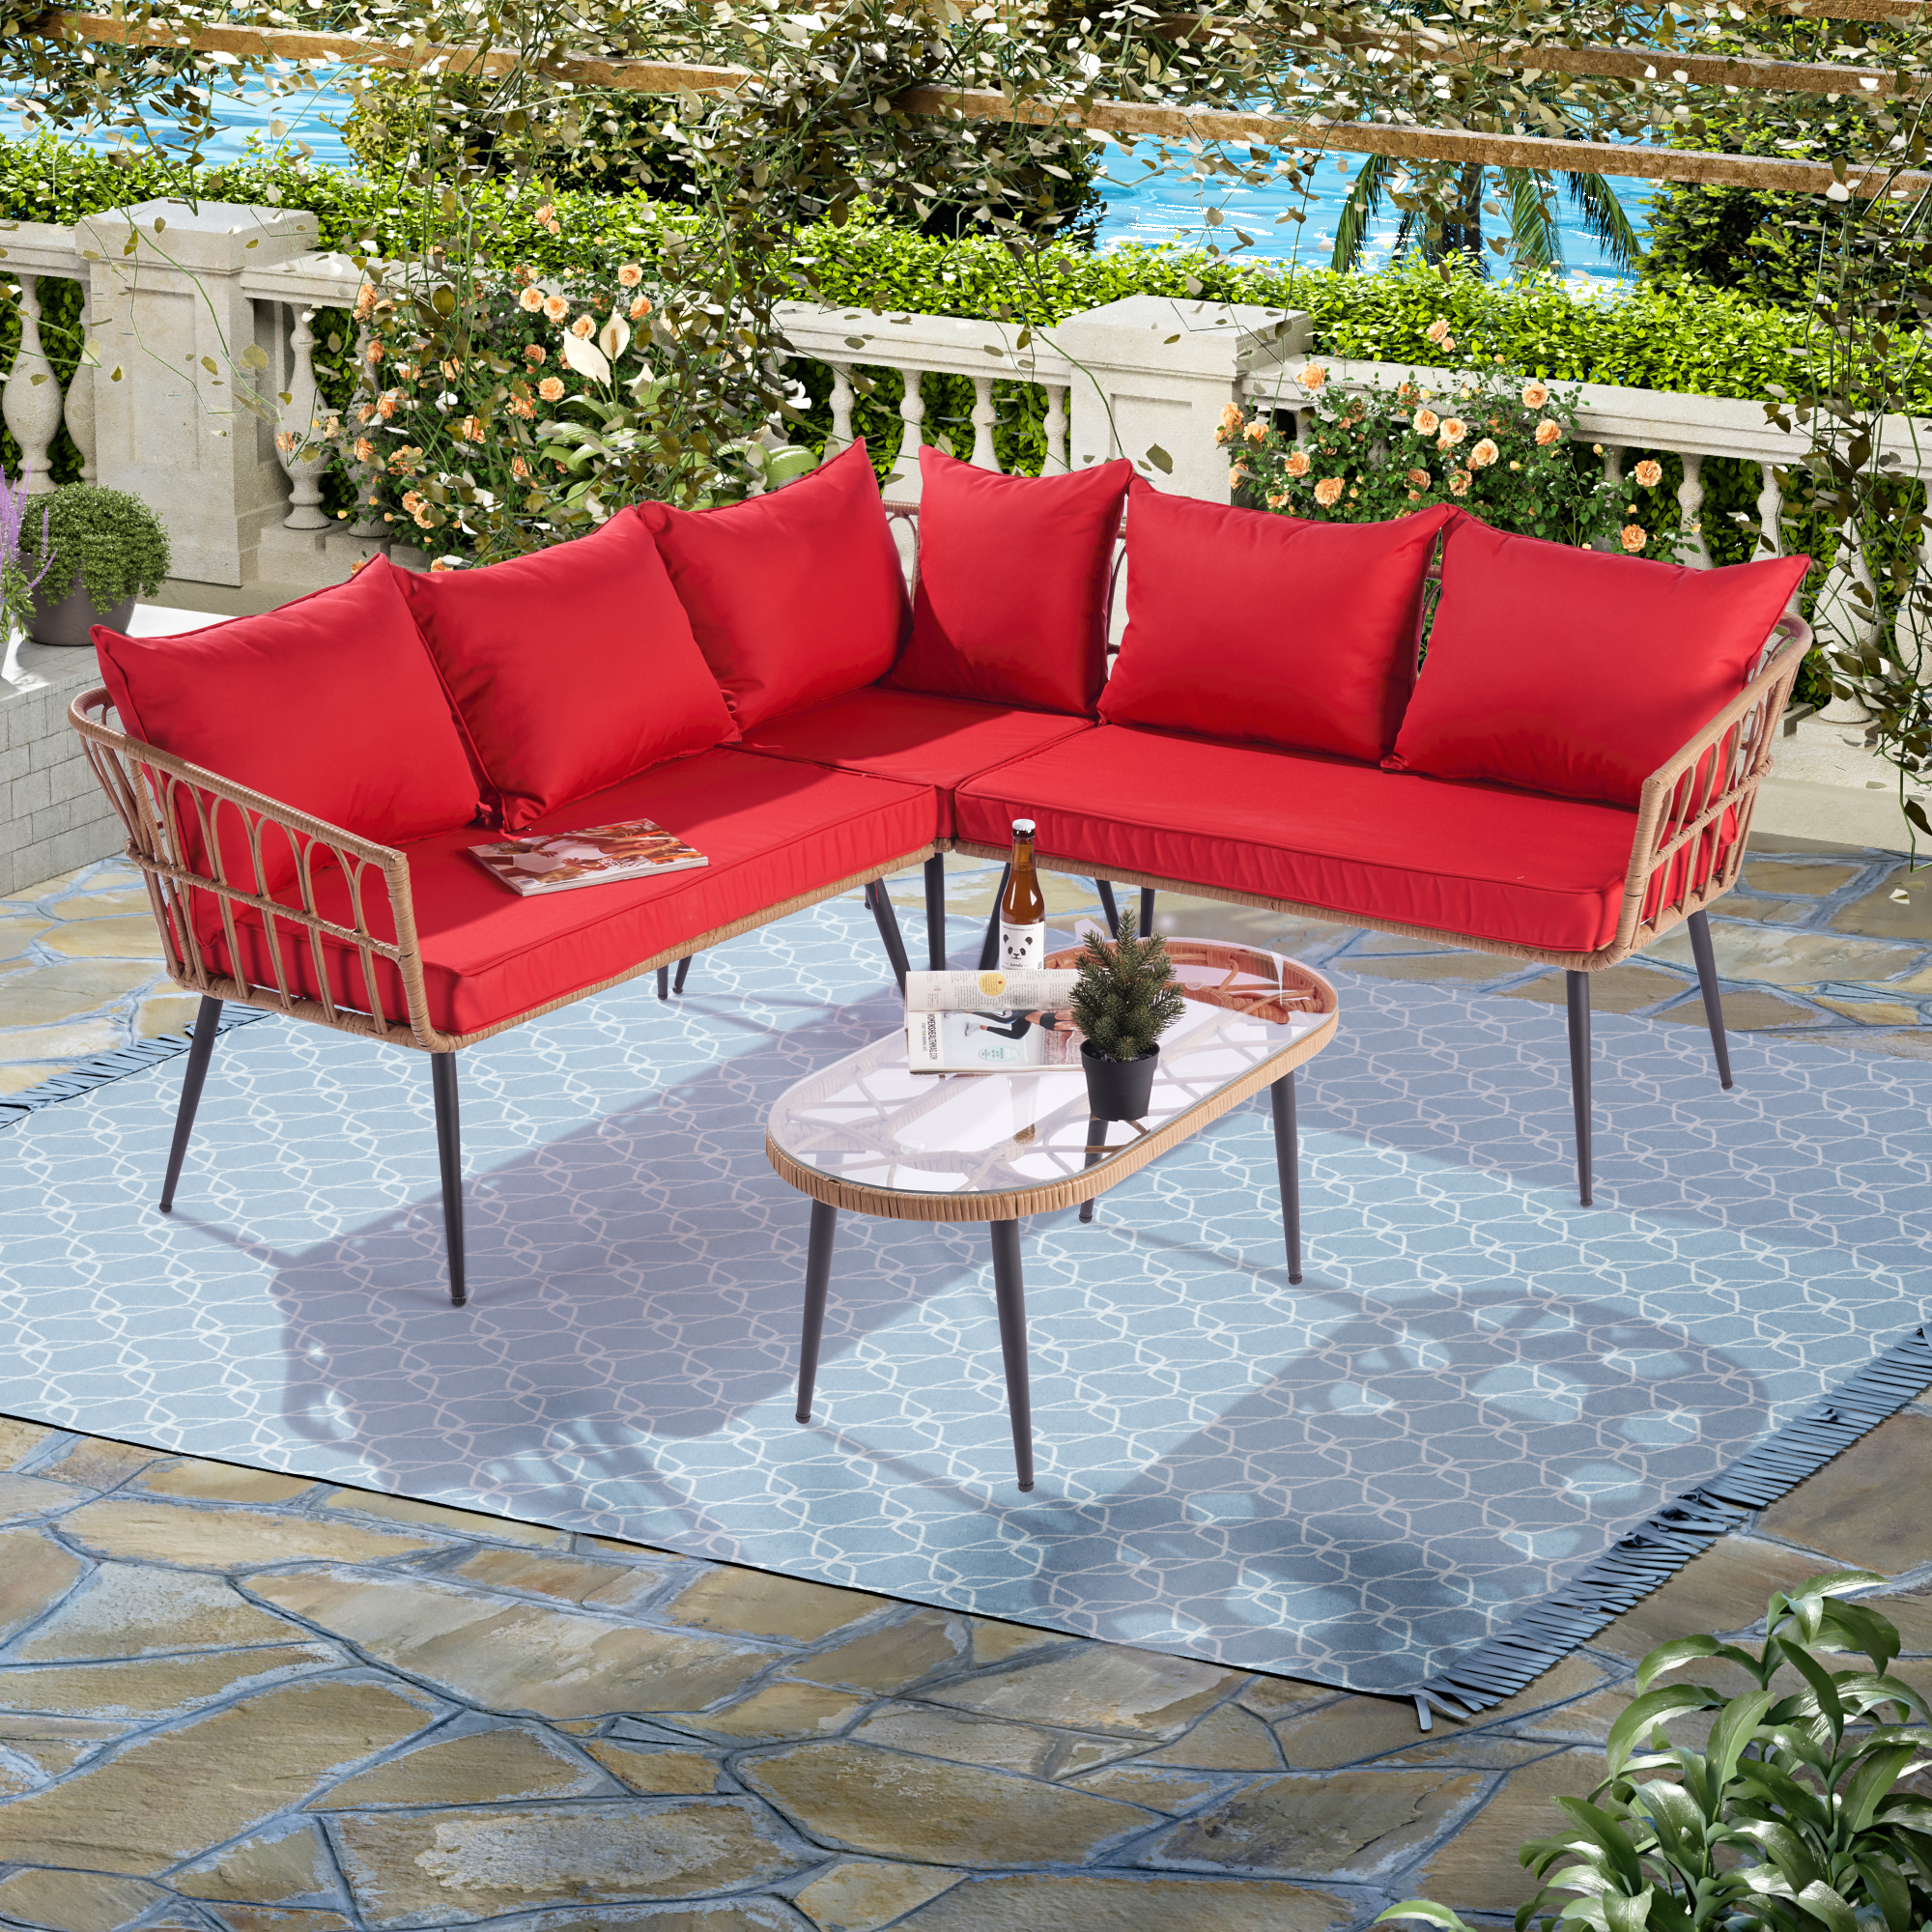 Outdoor Patio Chairs & Seating Sets Furniture for Outdoor Patio, 4-Piece Wicker Conversation Set w/L-Seats Sofa, R-Seats Sofa, Tempered Glass Dining Table, Padded Cushions, S8316 - image 1 of 7